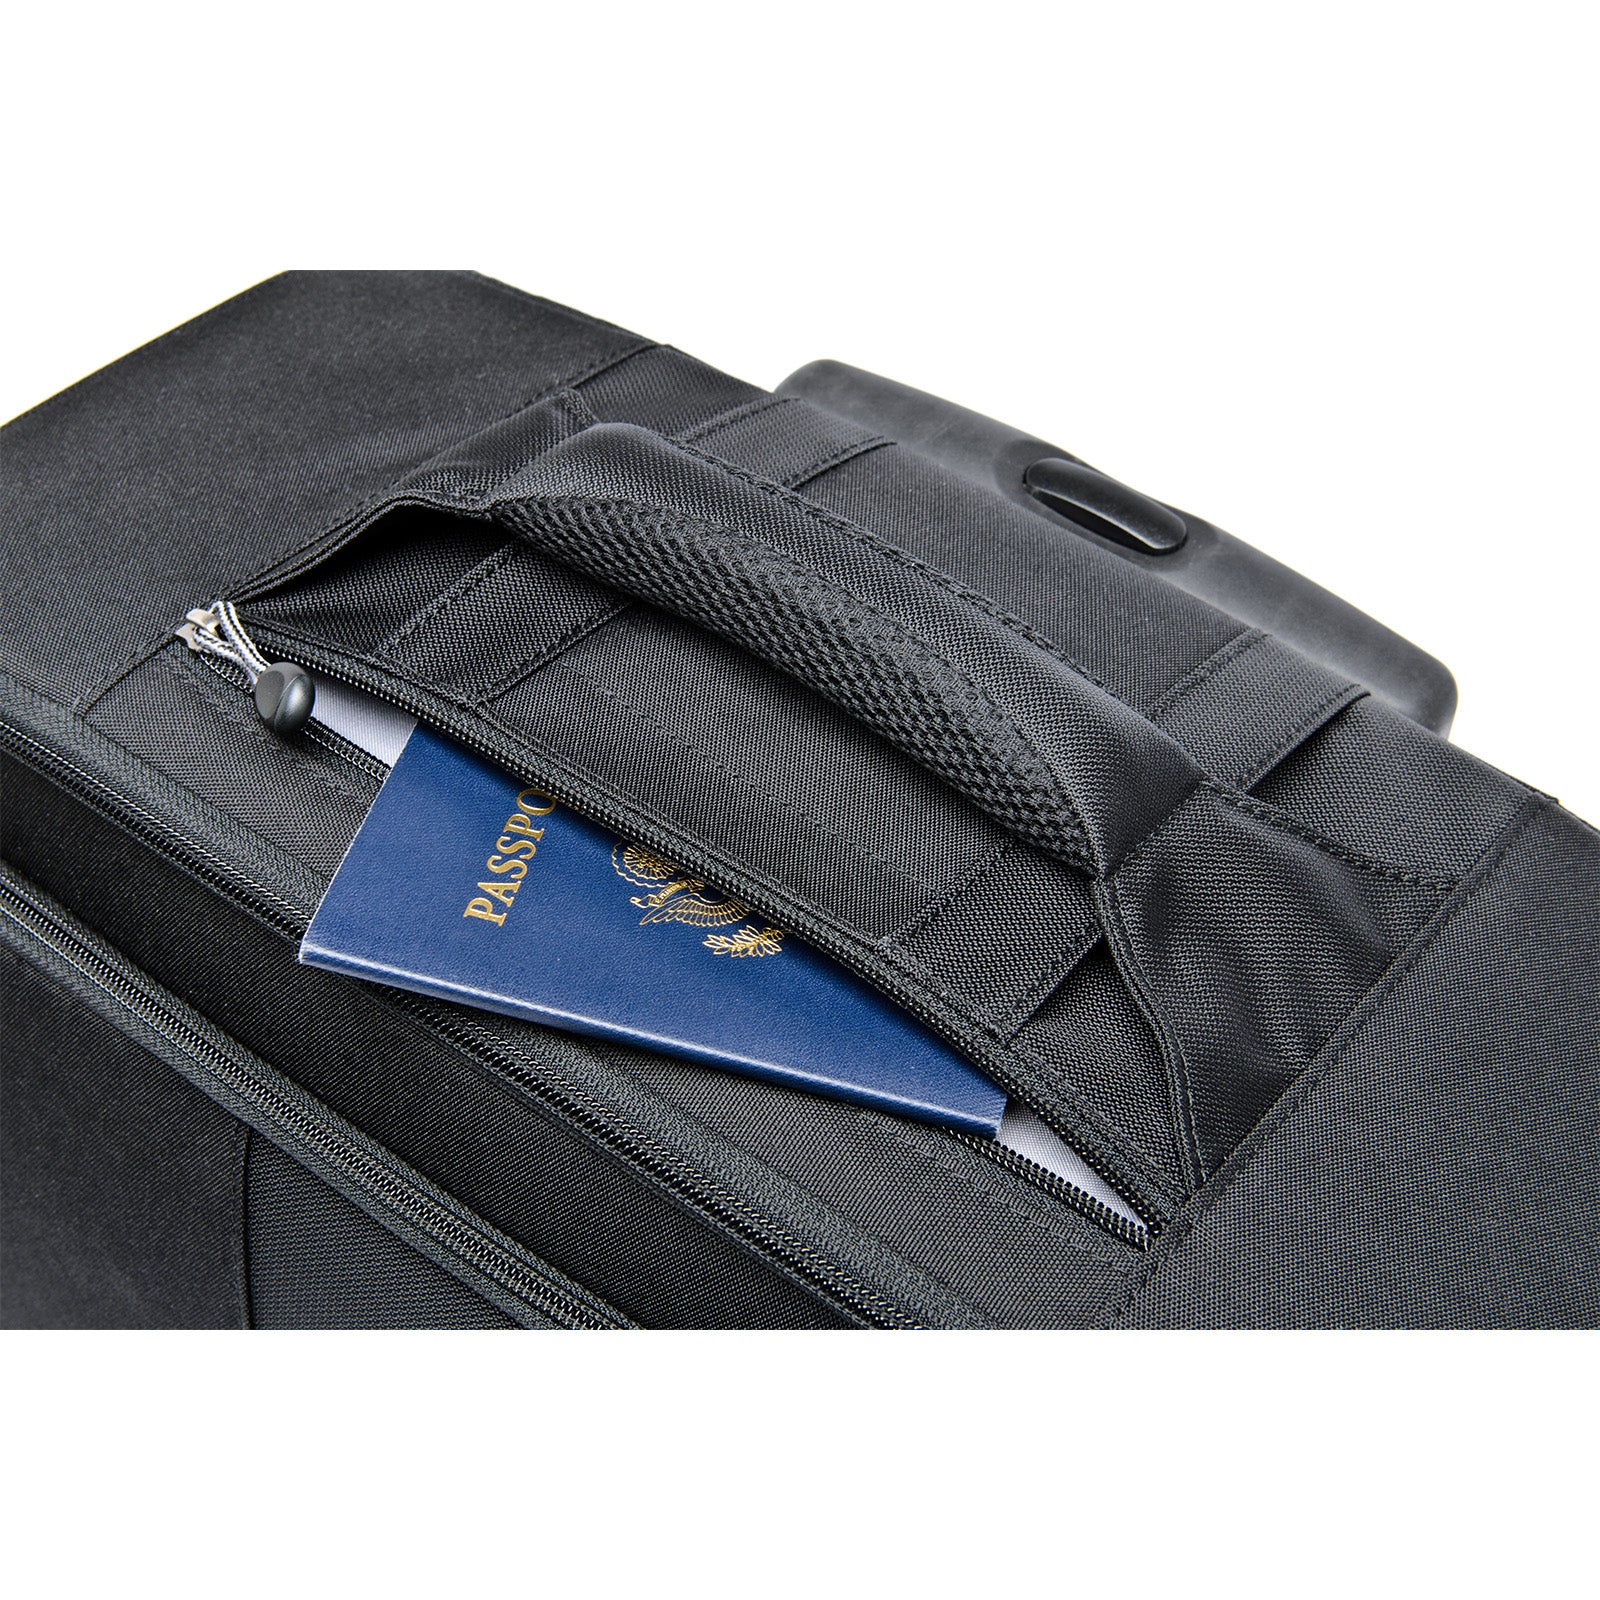 Slim top pocket fits travel documents or small accessories